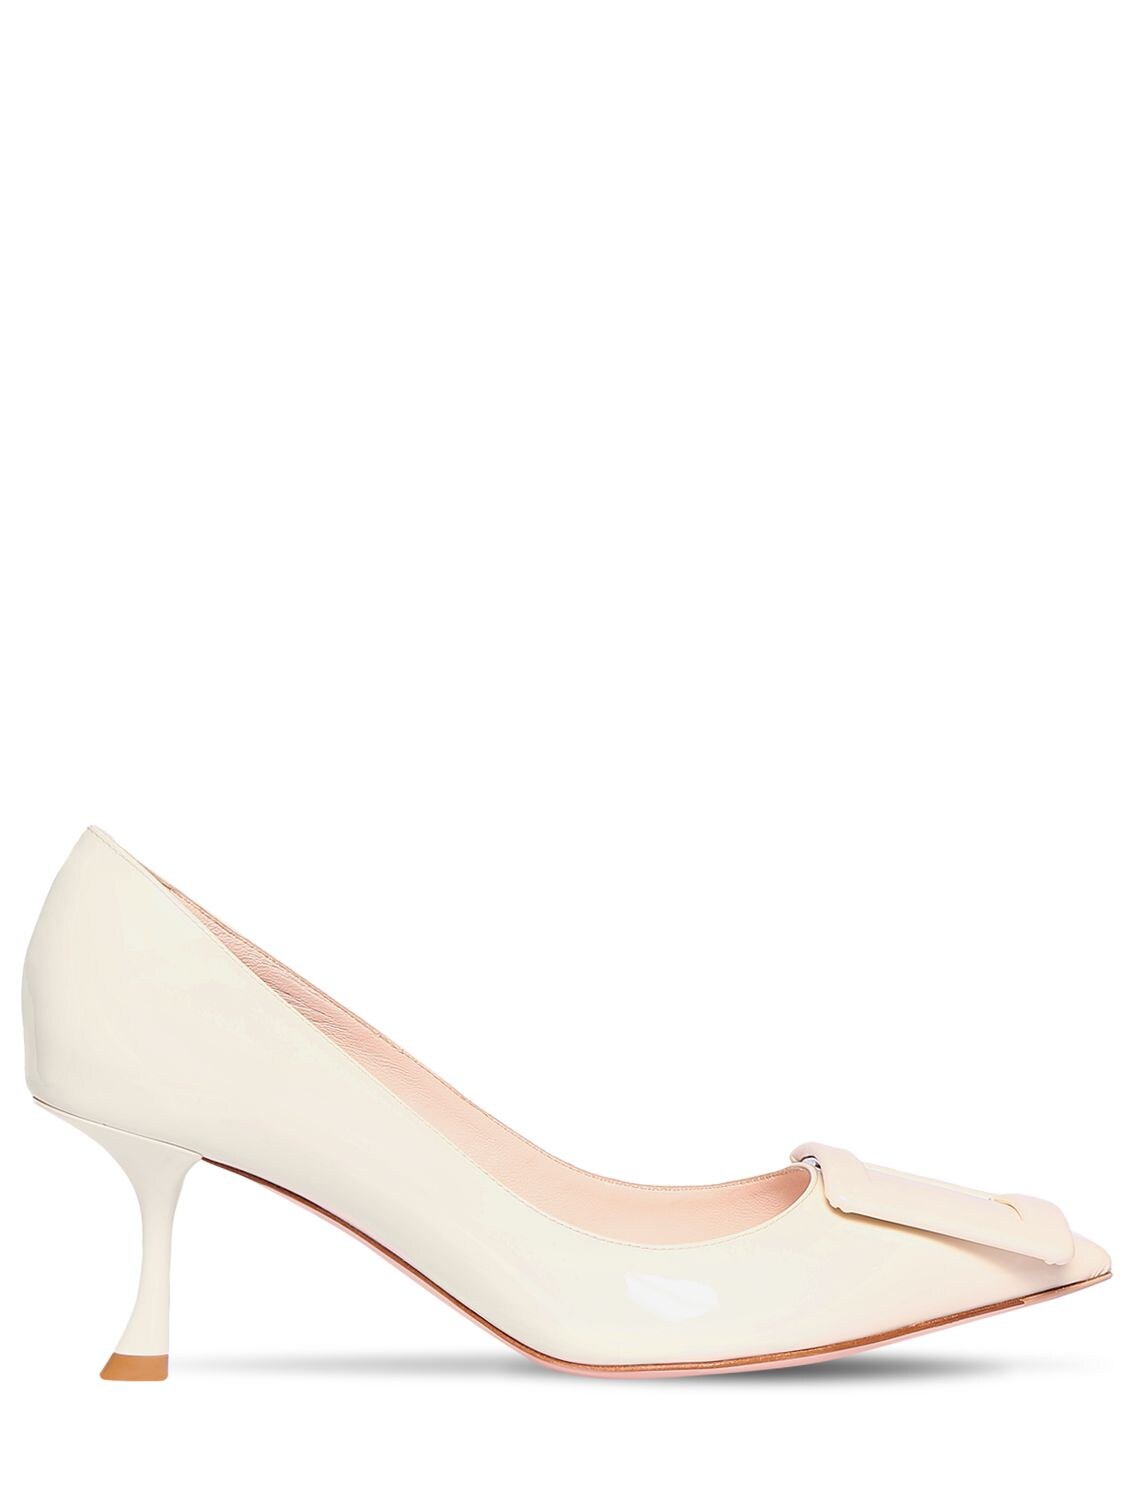 Roger Vivier 65mm Covered Buckle Patent Leather Pumps In Off White